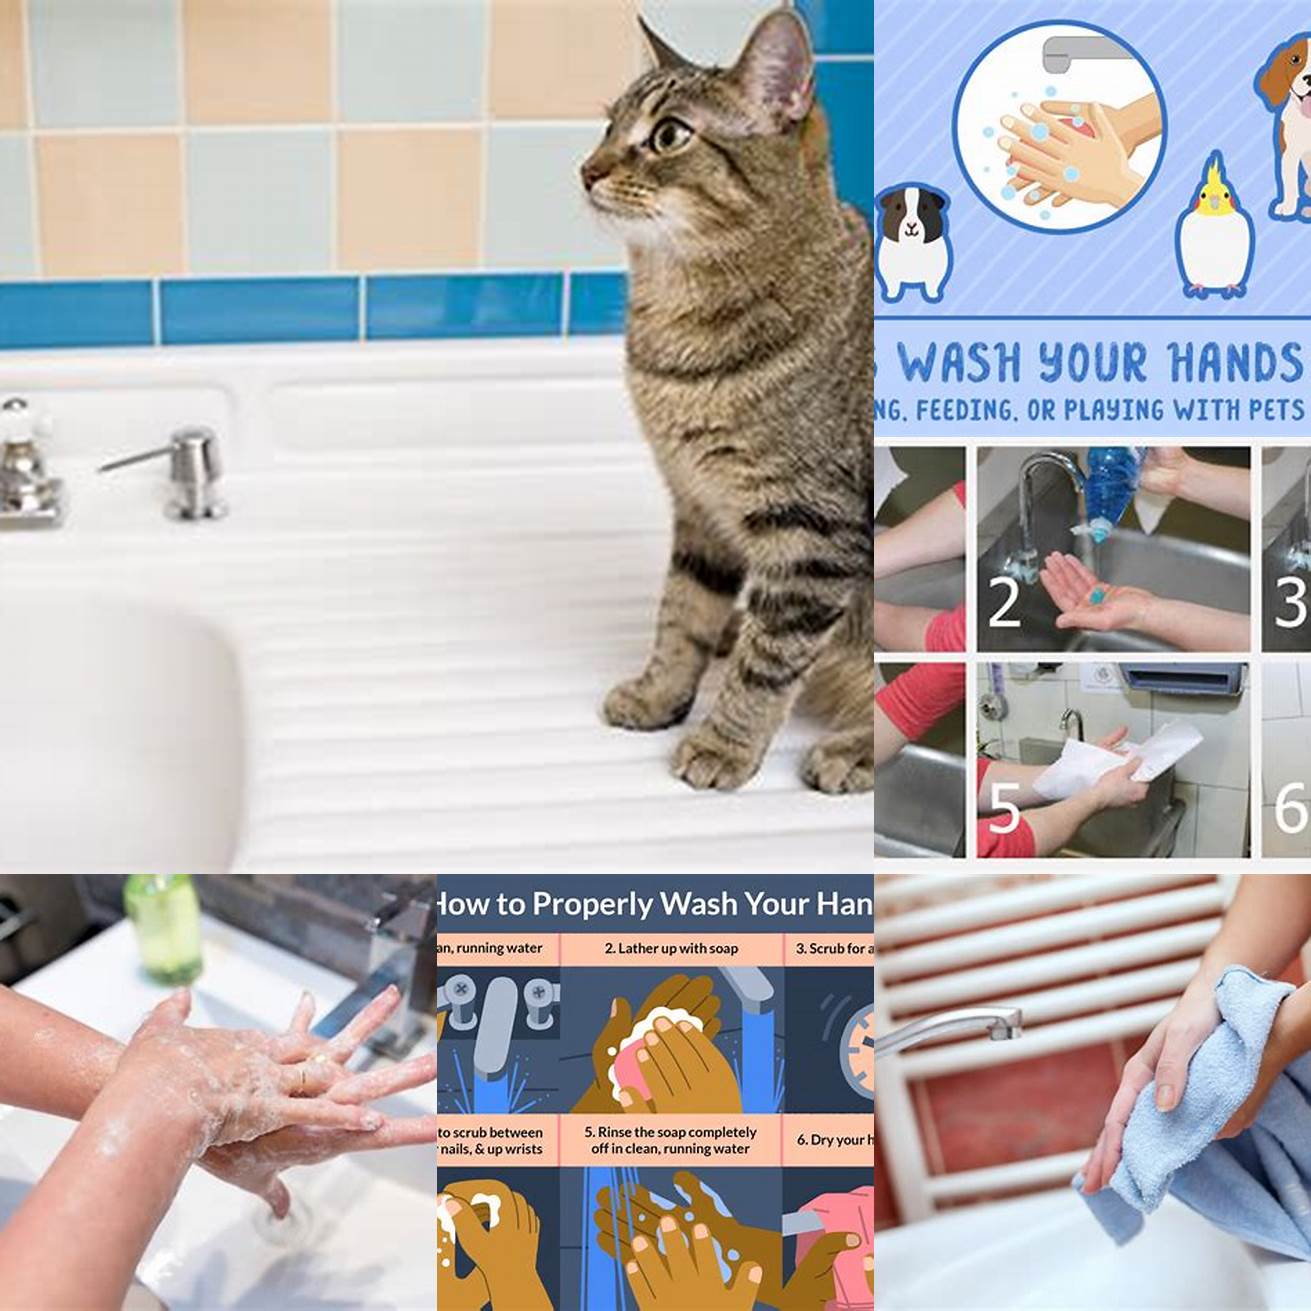 Wash your hands thoroughly after handling cat litter